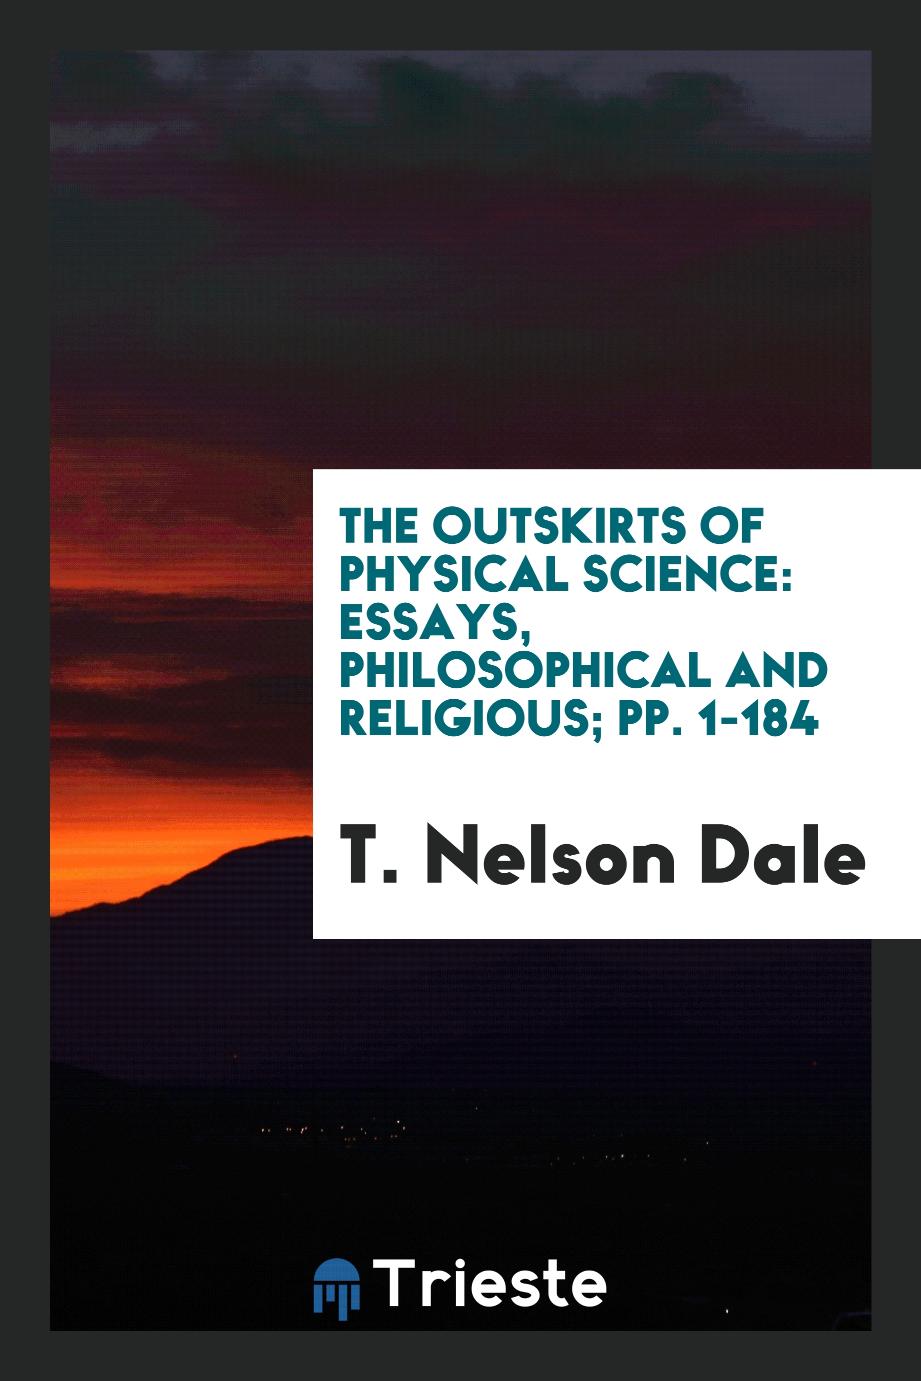 The Outskirts of Physical Science: Essays, Philosophical and Religious; pp. 1-184